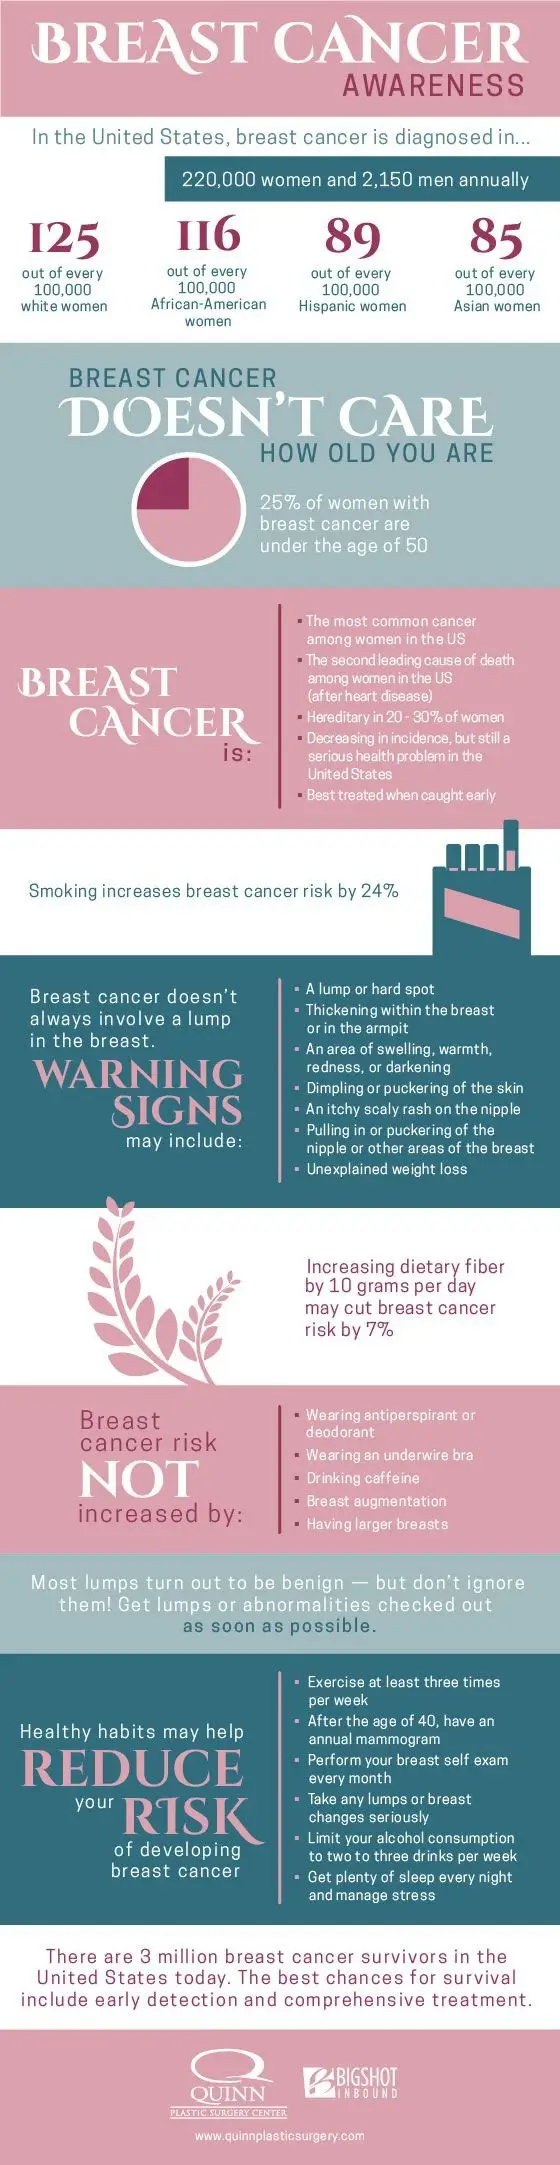 Breast Cancer 101